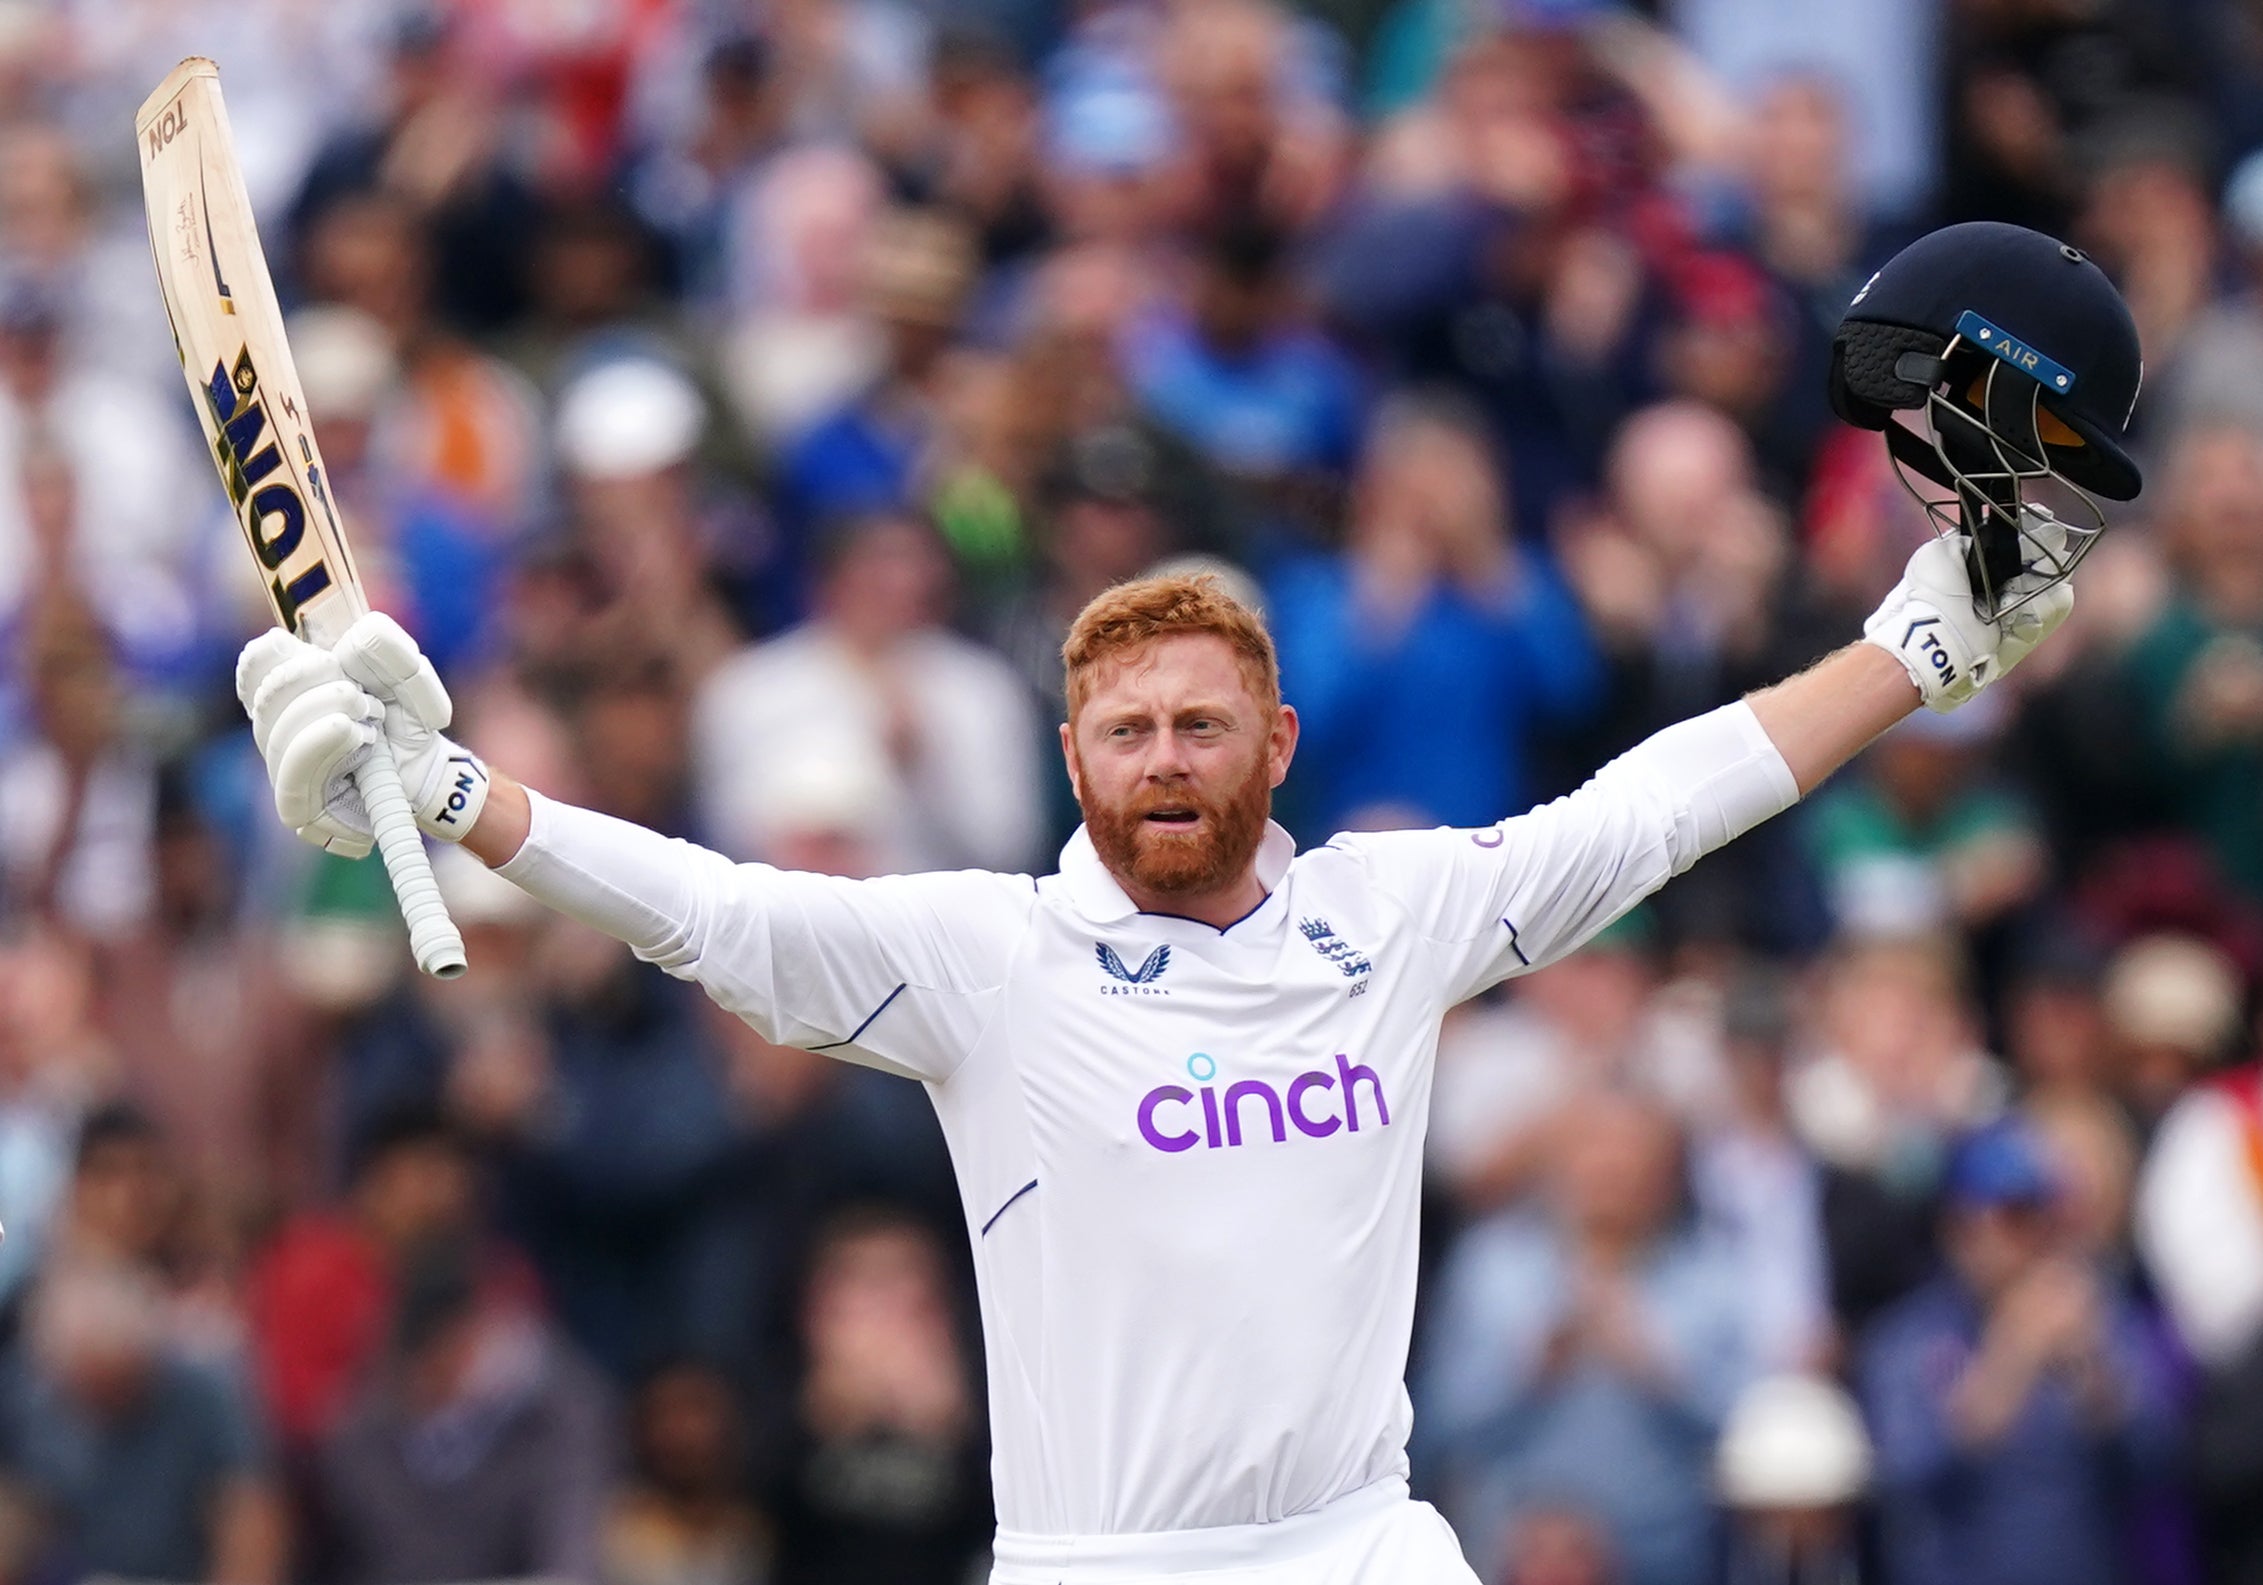 England’s Jonny Bairstow celebrates a century during day three of the fifth Test